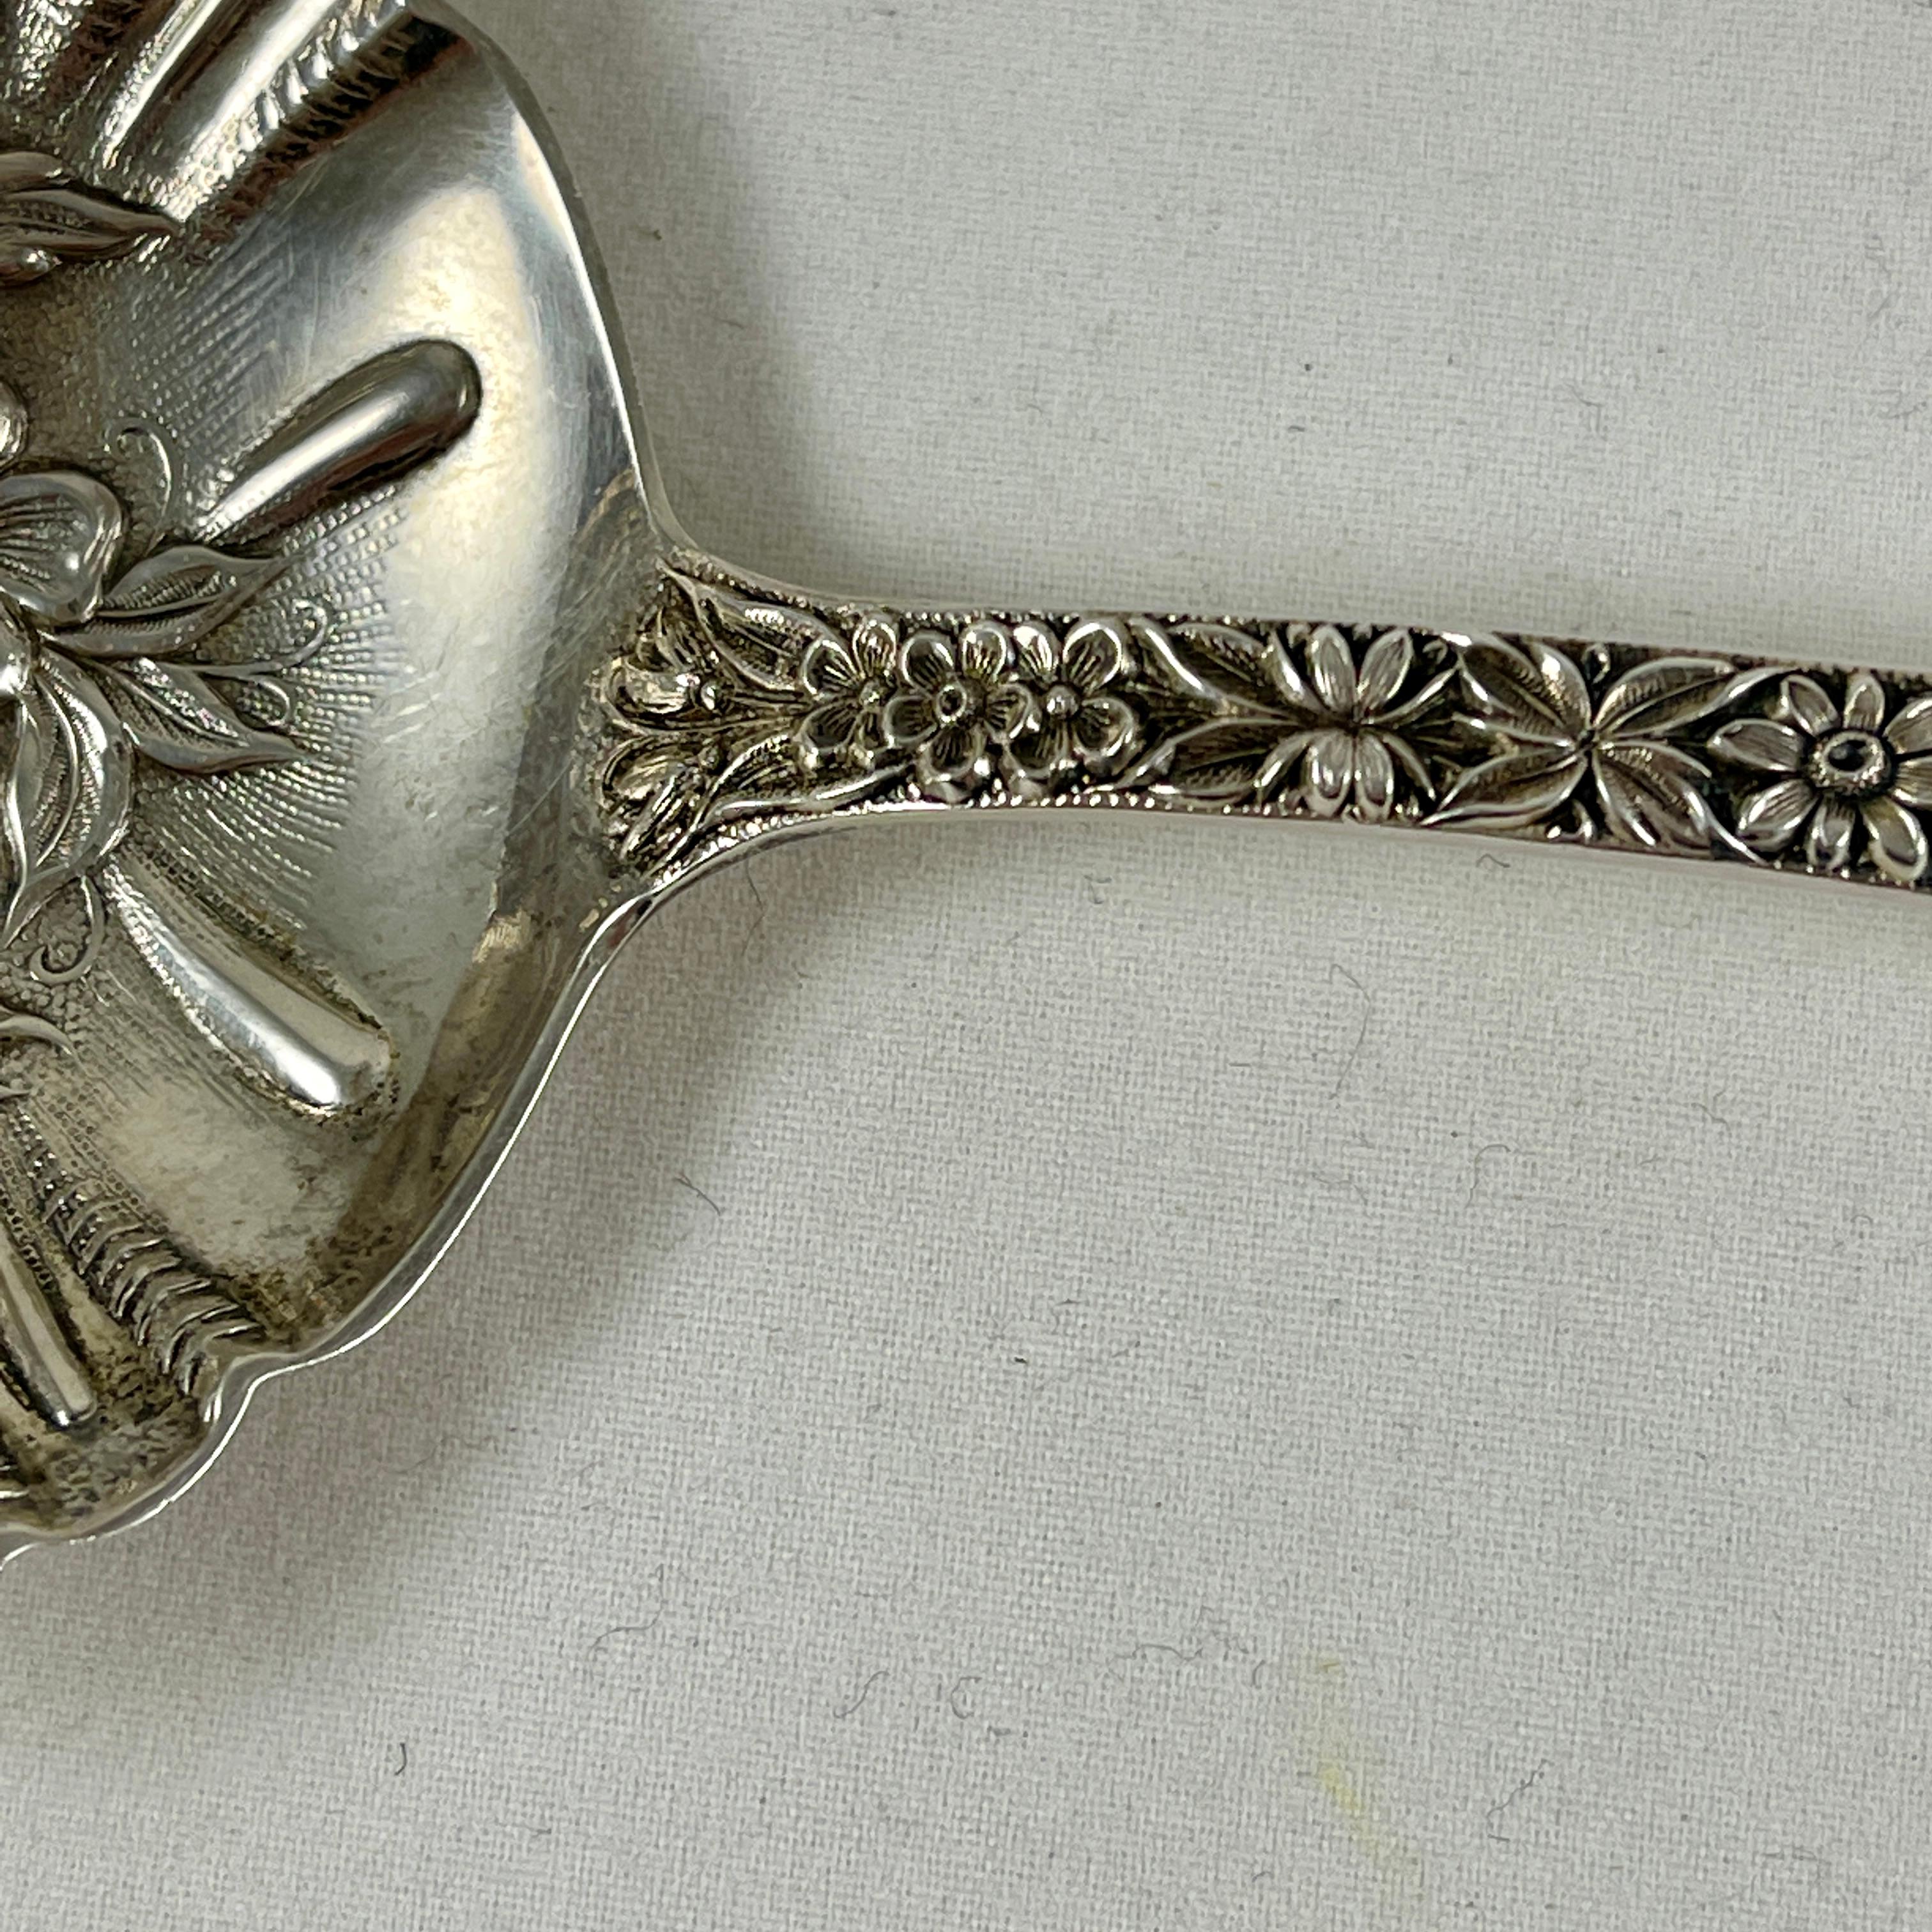 S KIRK & SON Sterling Silver REPOUSSE SPOONS 5-7/8" TEASPOON SPOON Details about   VTG SET OF 4 